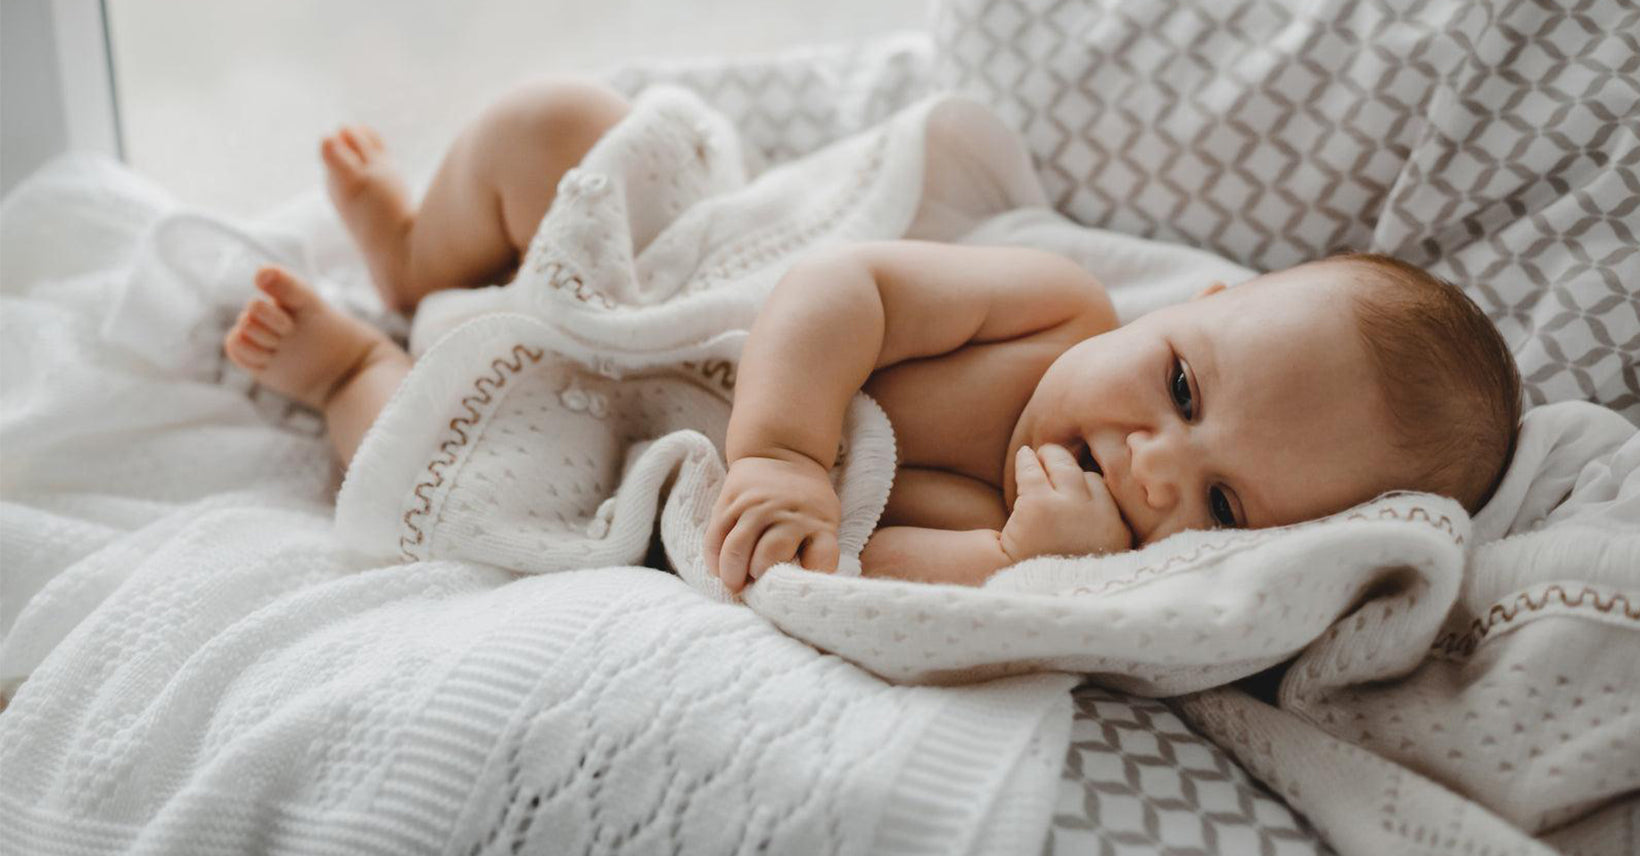 When Can Babies Safely Sleep with a Blanket?